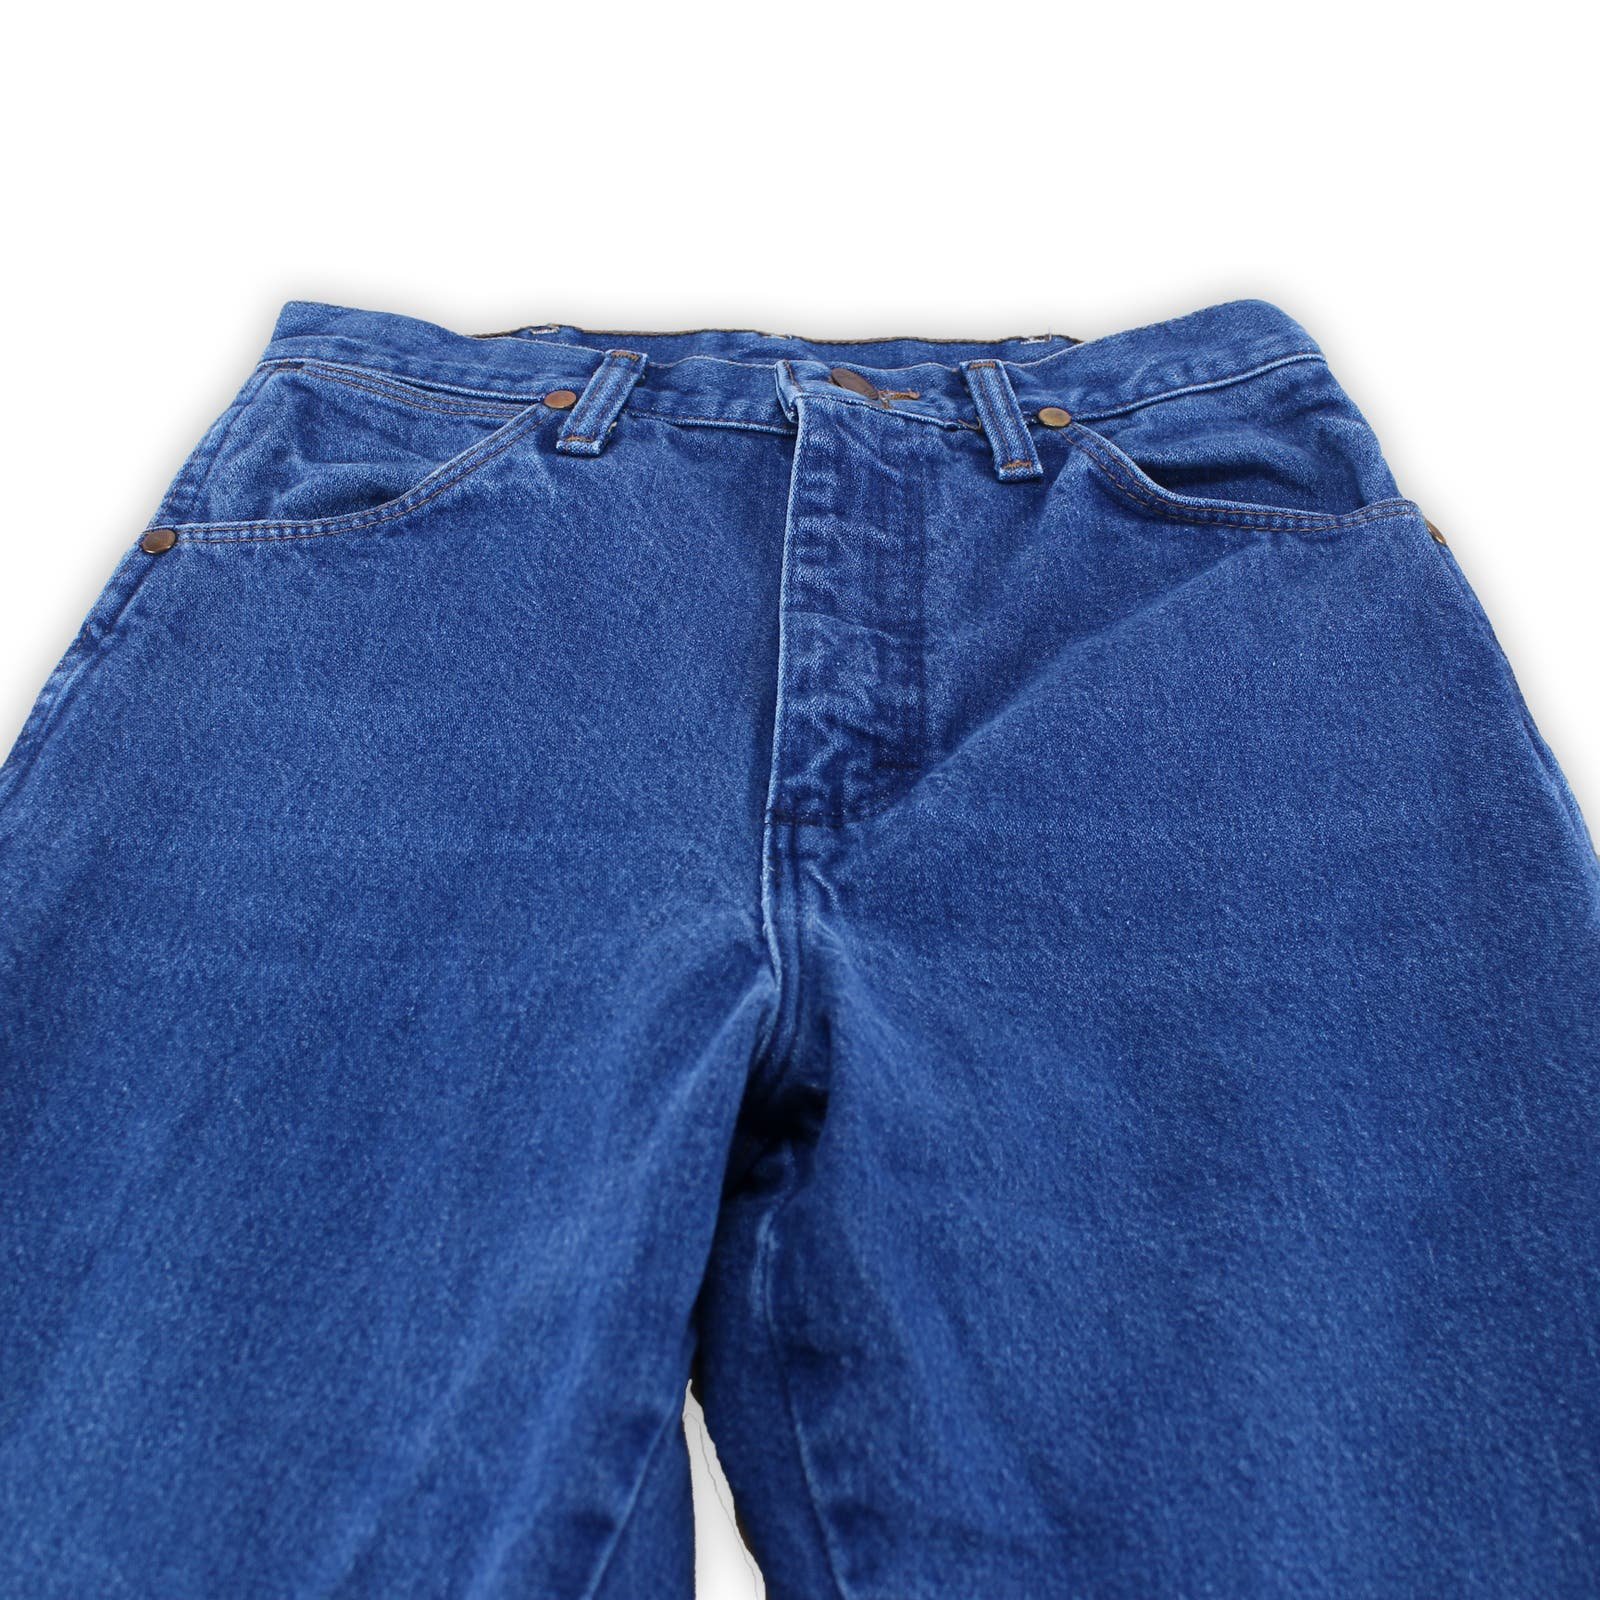 the Lowest price Wrangler Jeans - Vintage Denim Pants - Made in USA - 26 Waist - Size 7 gTHBOhm1z Store Online